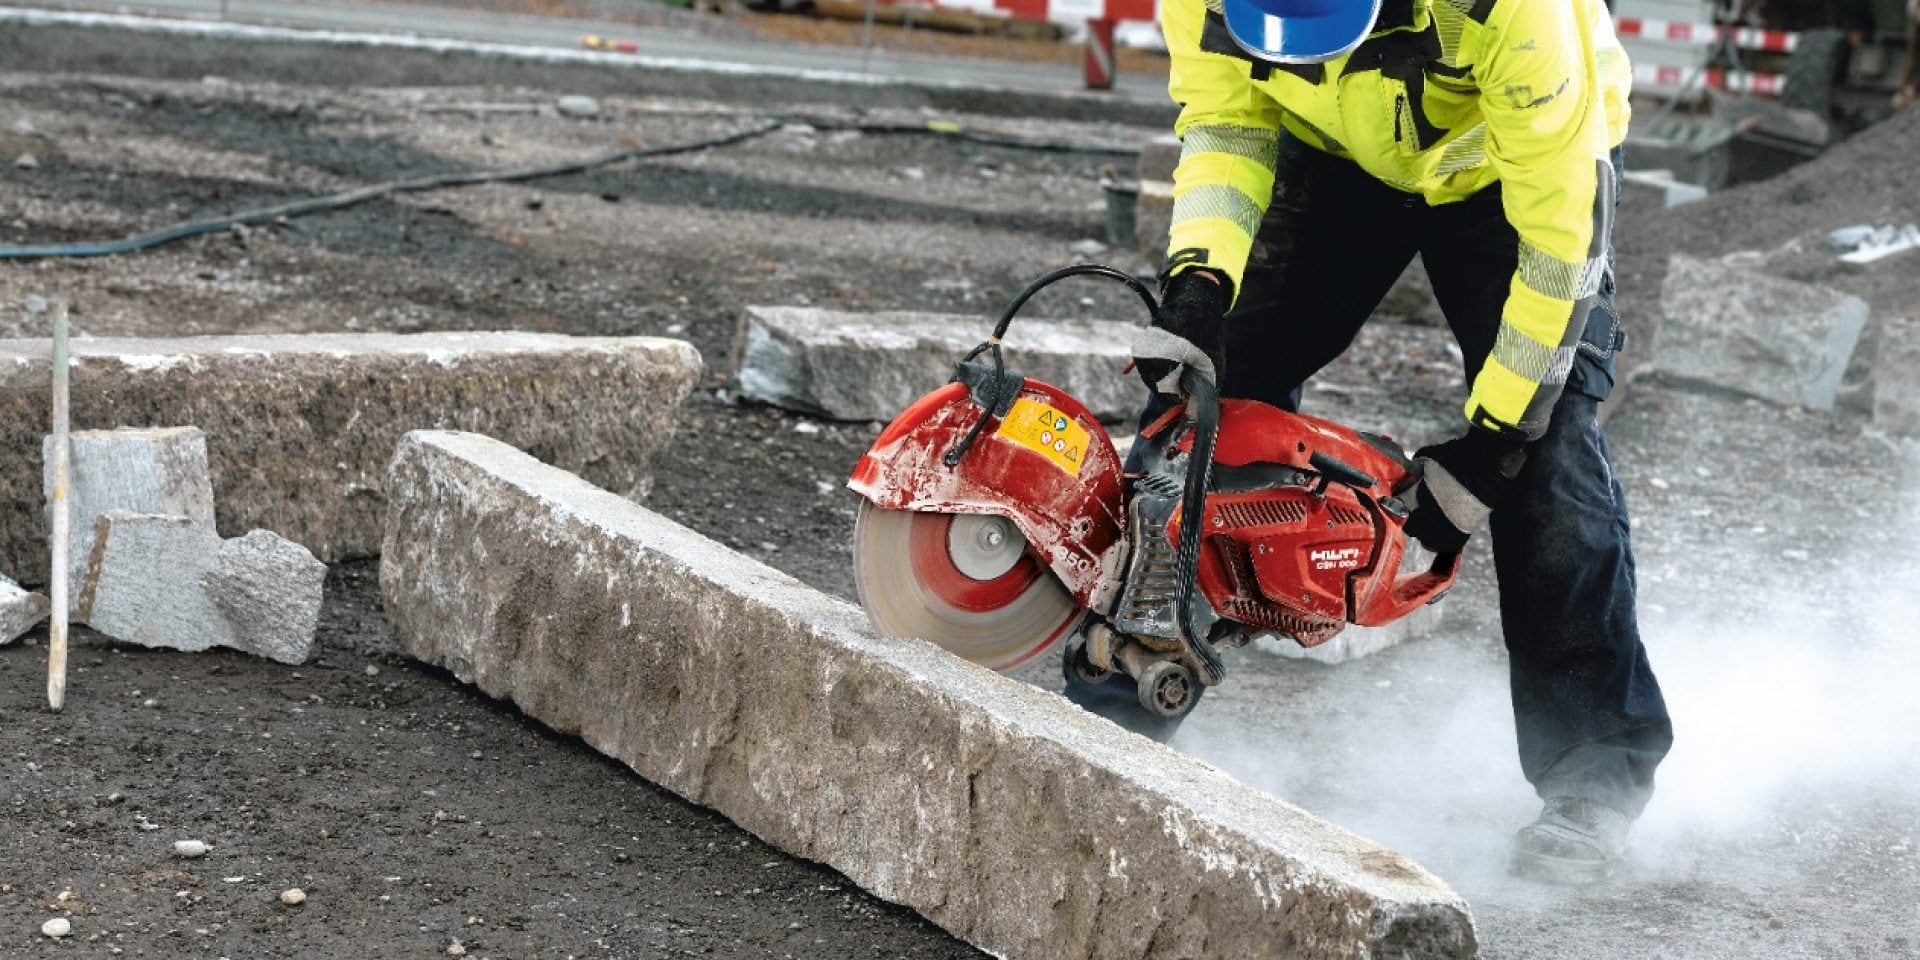 Dust is created at nearly every point in the construction process including cutting concrete